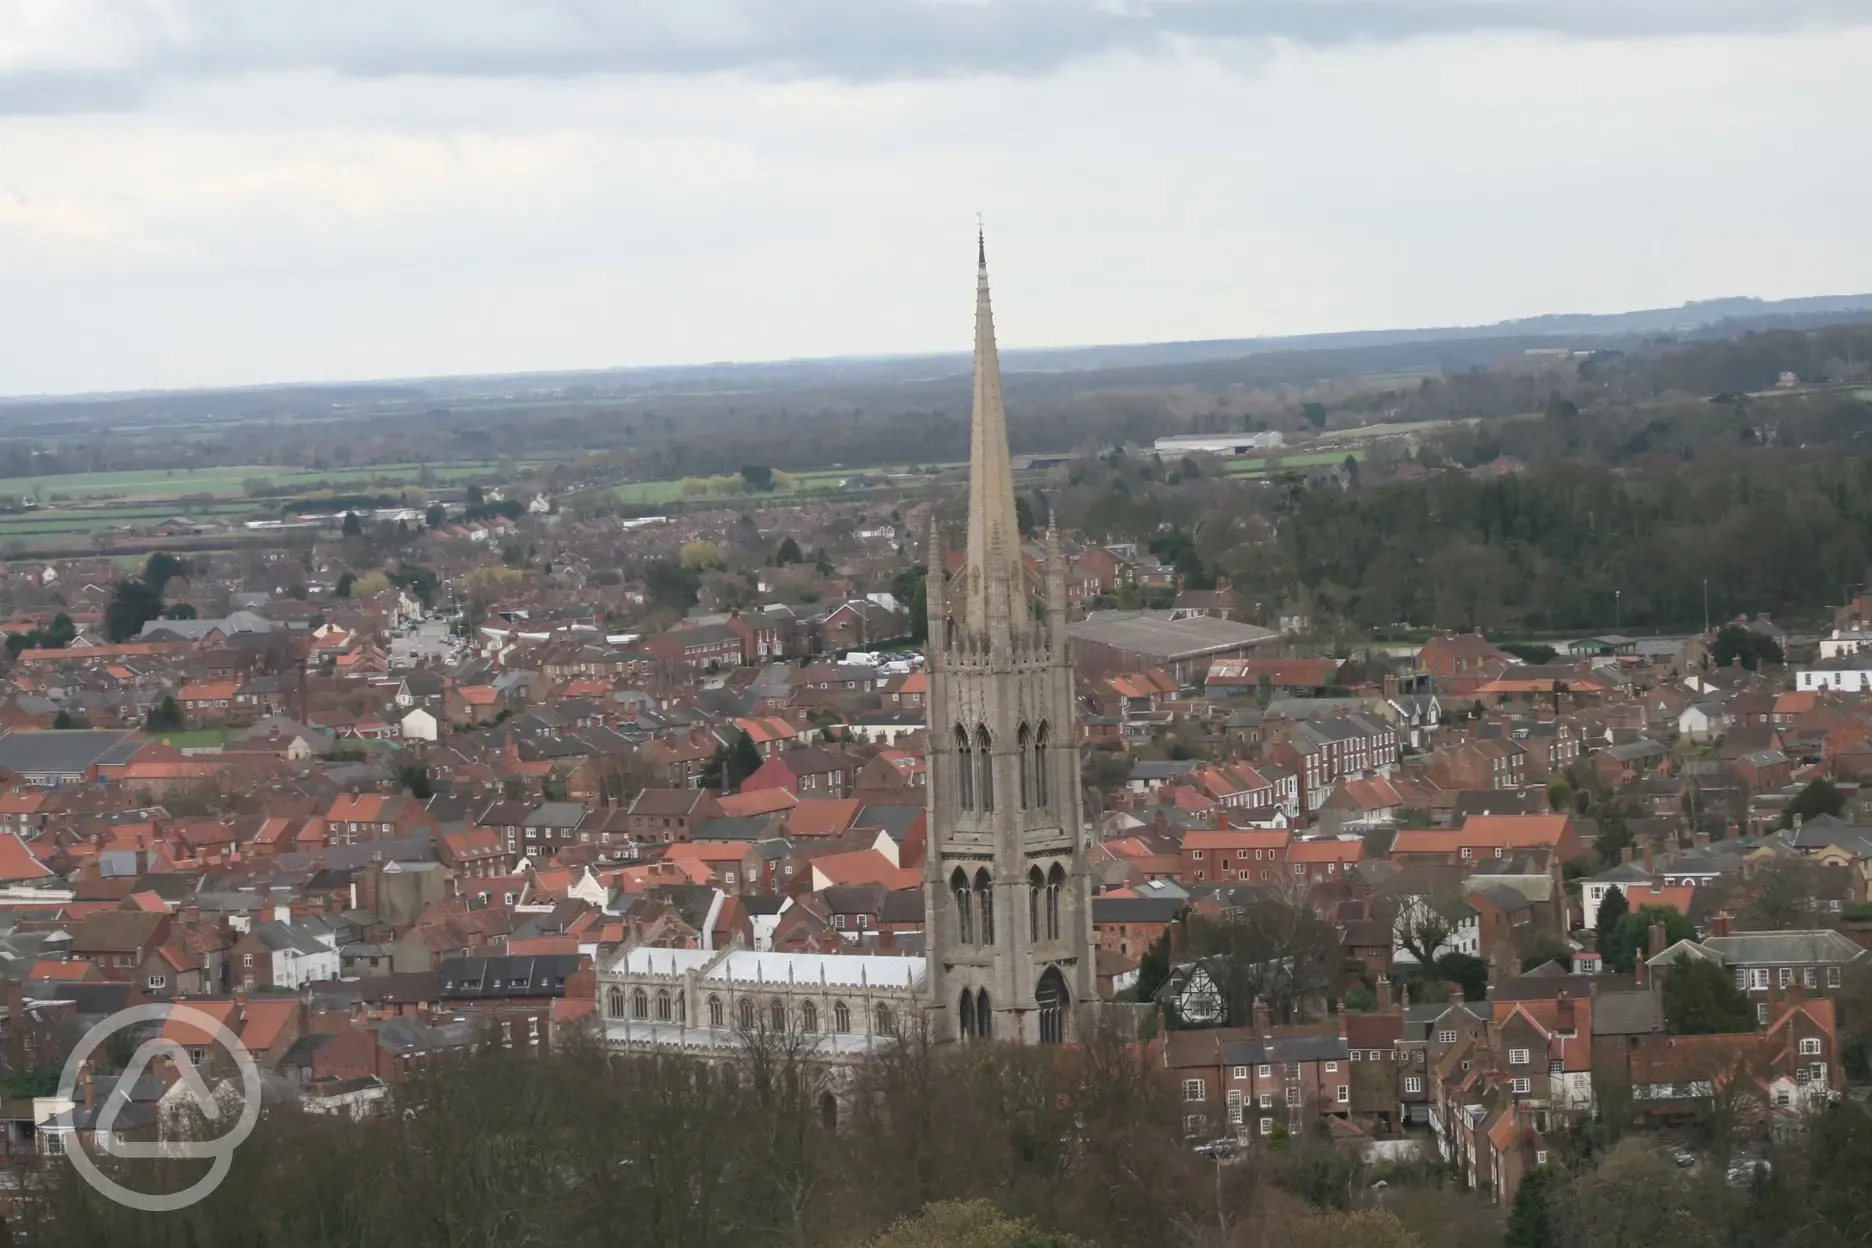 Local town and cathedral